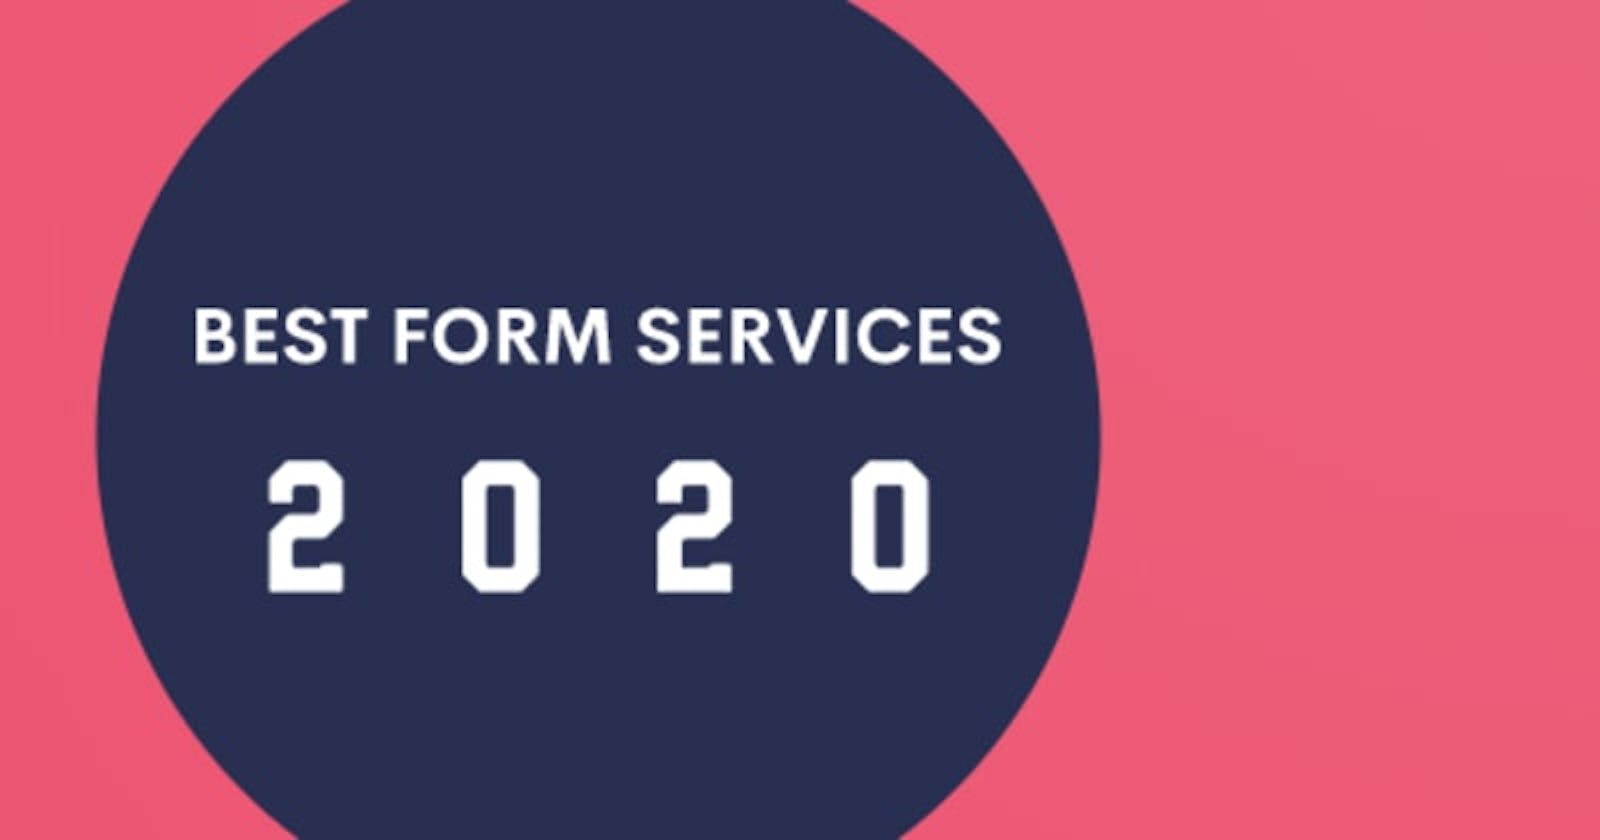 Best Form Services to use in 2020